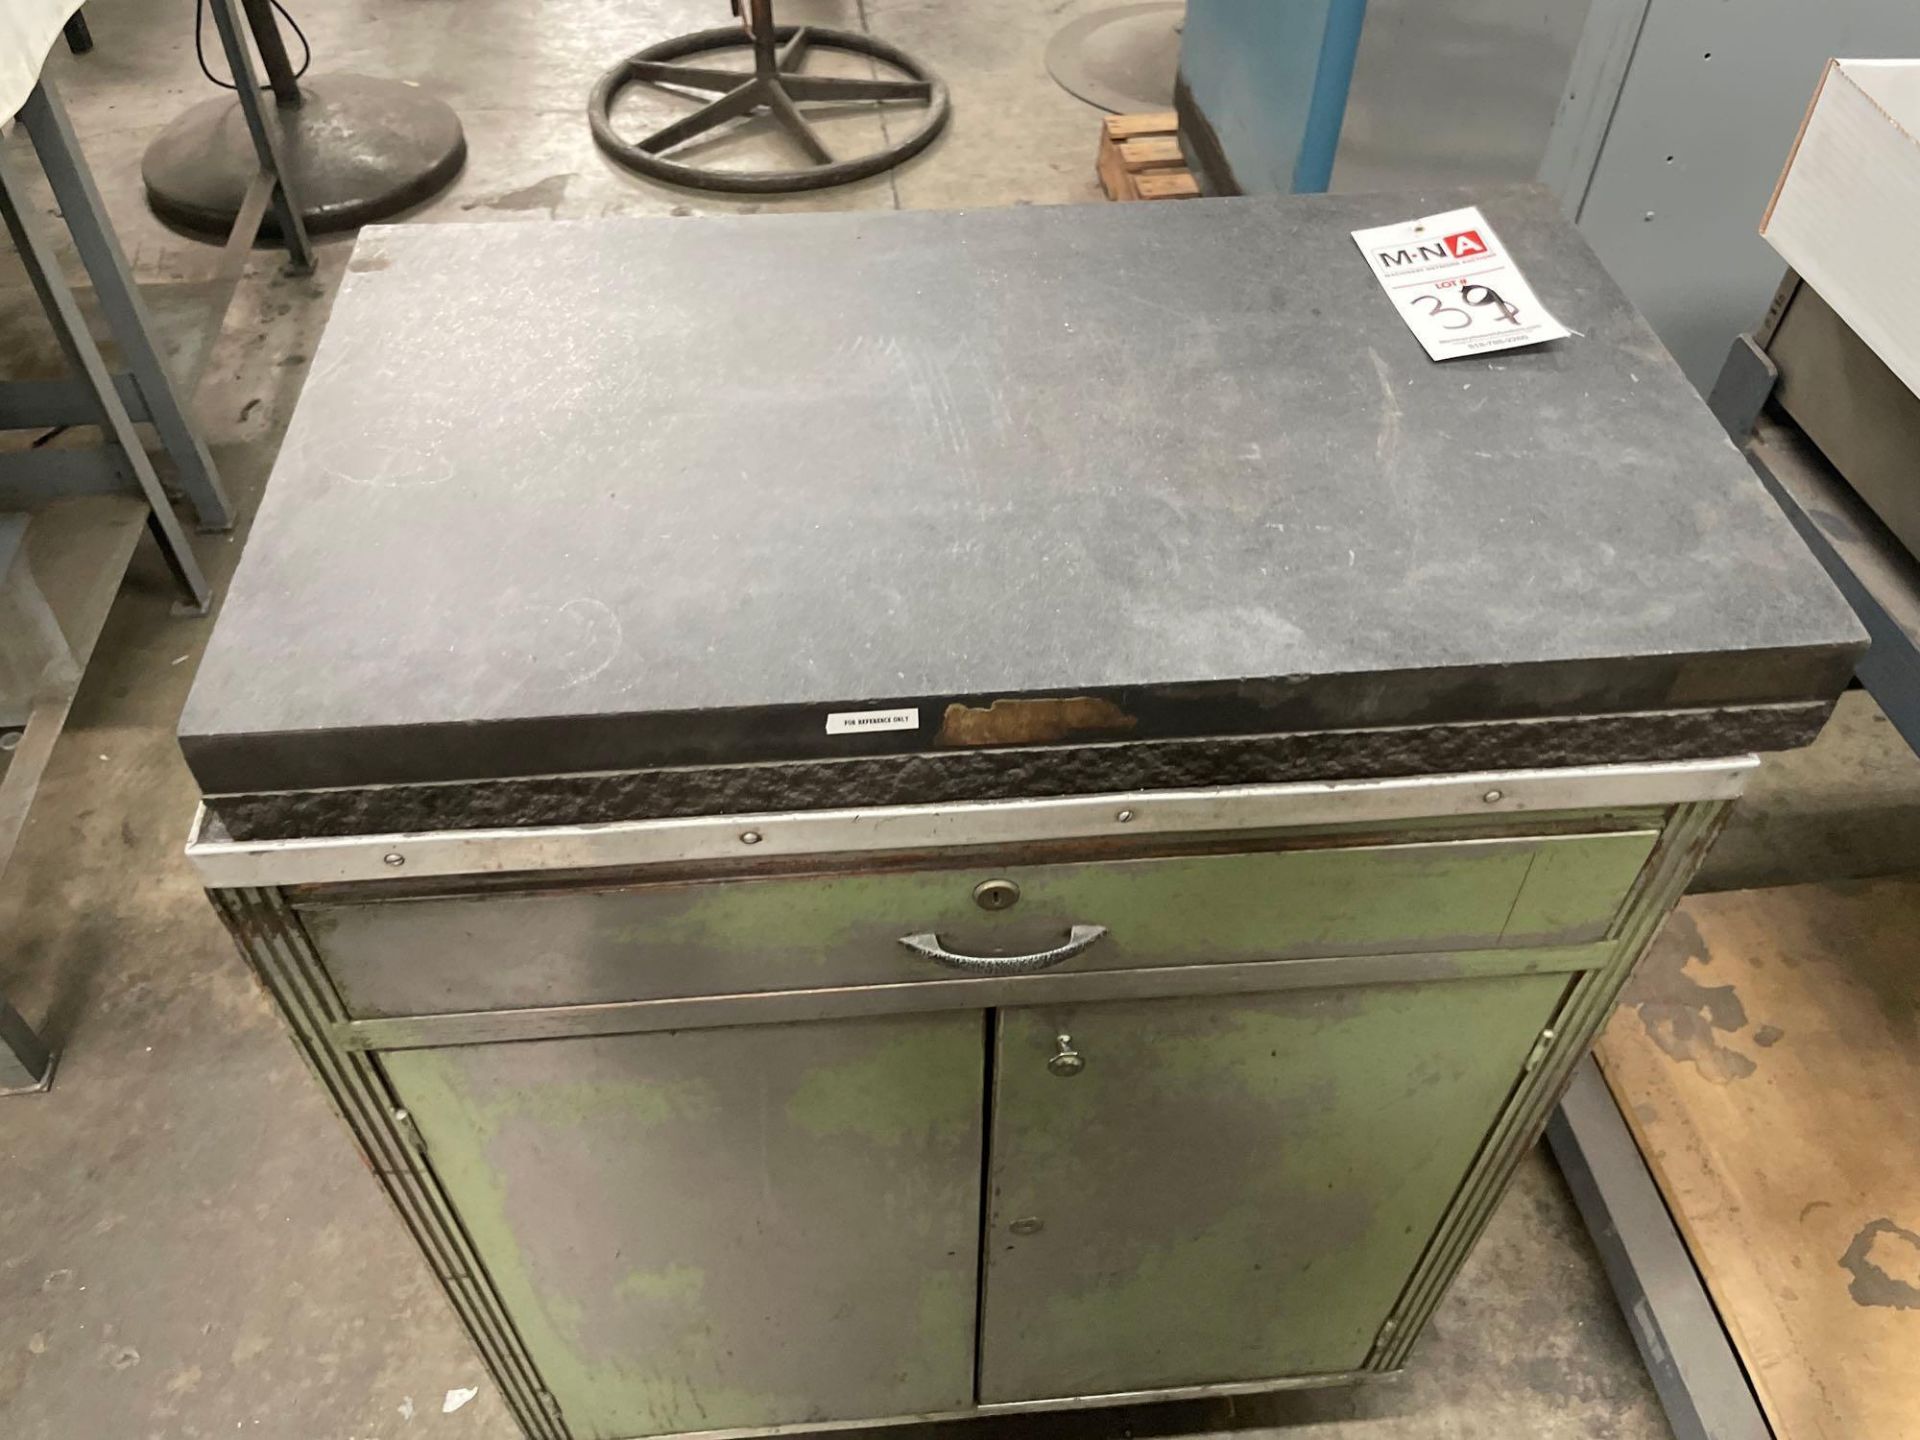 2 Door Cabinet with Granite Surface Plate: 16" x 28" x 2.5"